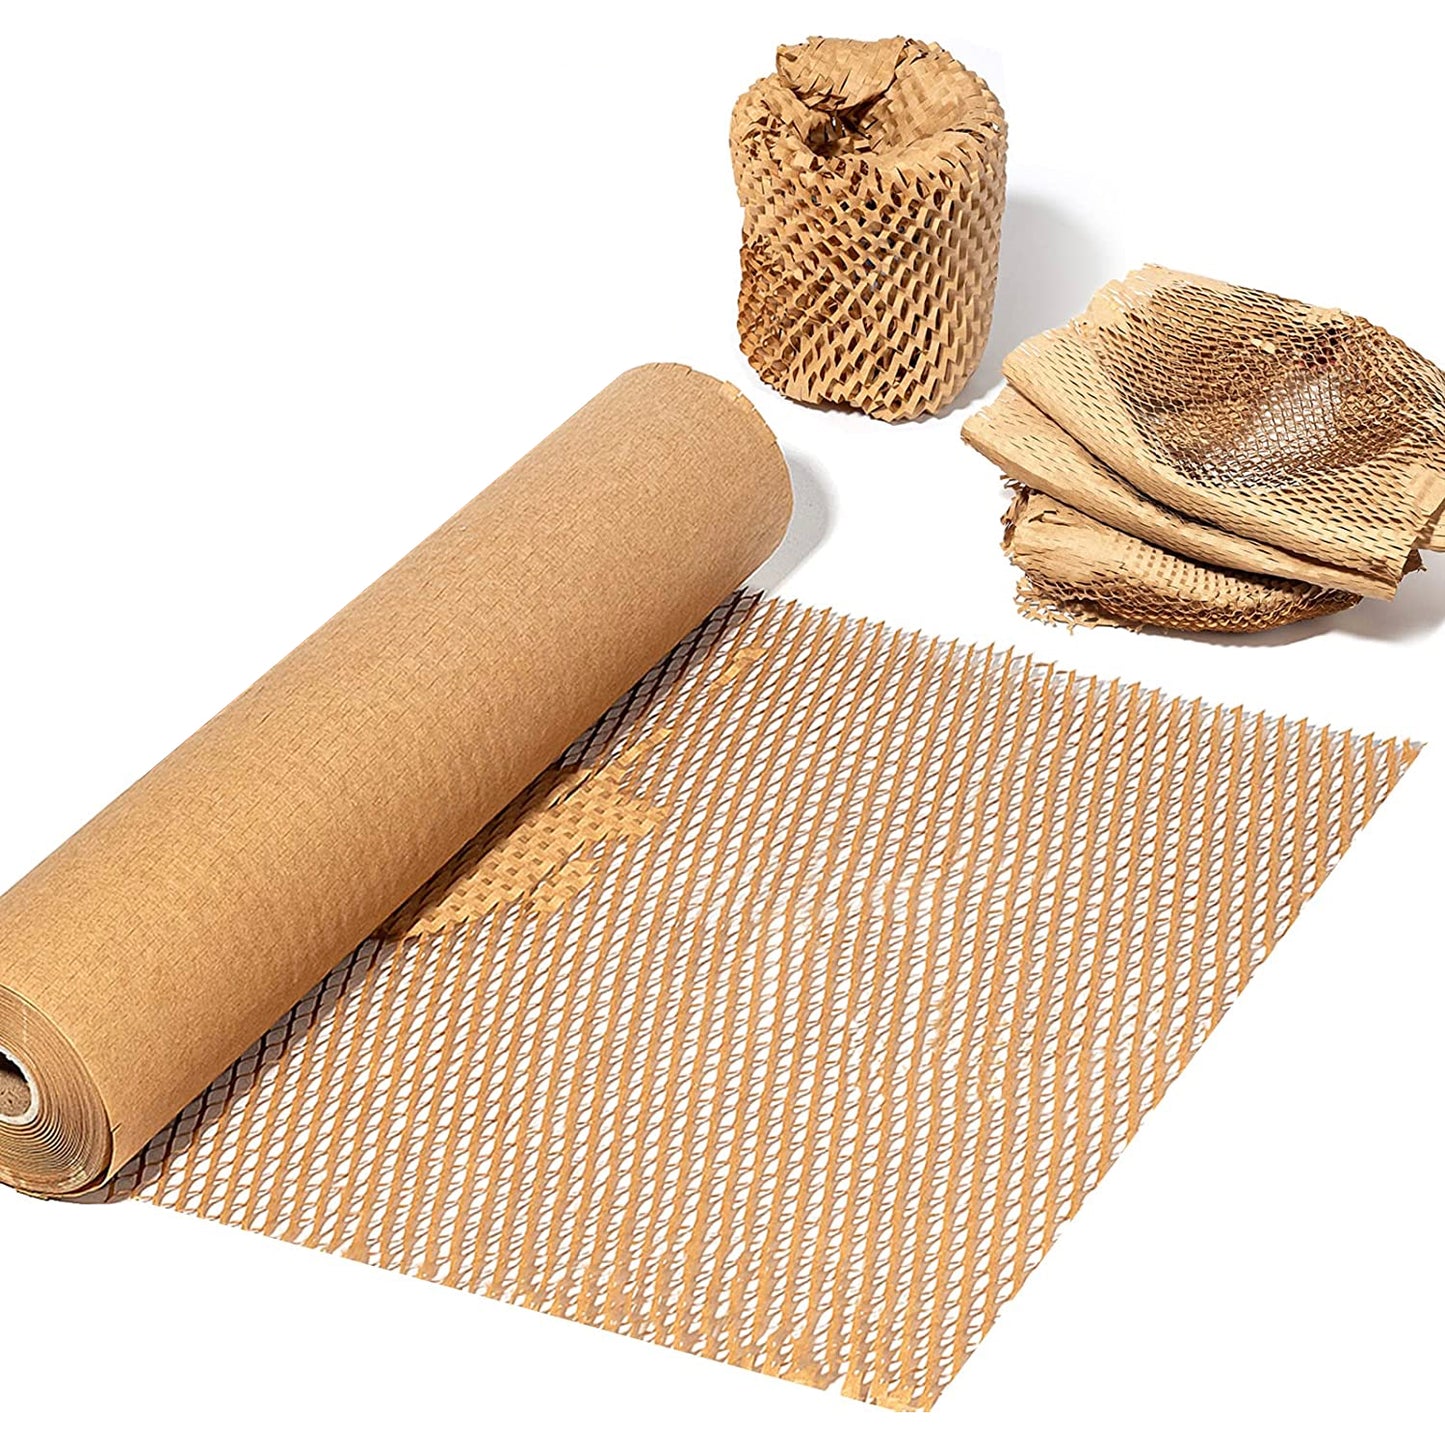 Honeycomb Packing Paper Roll